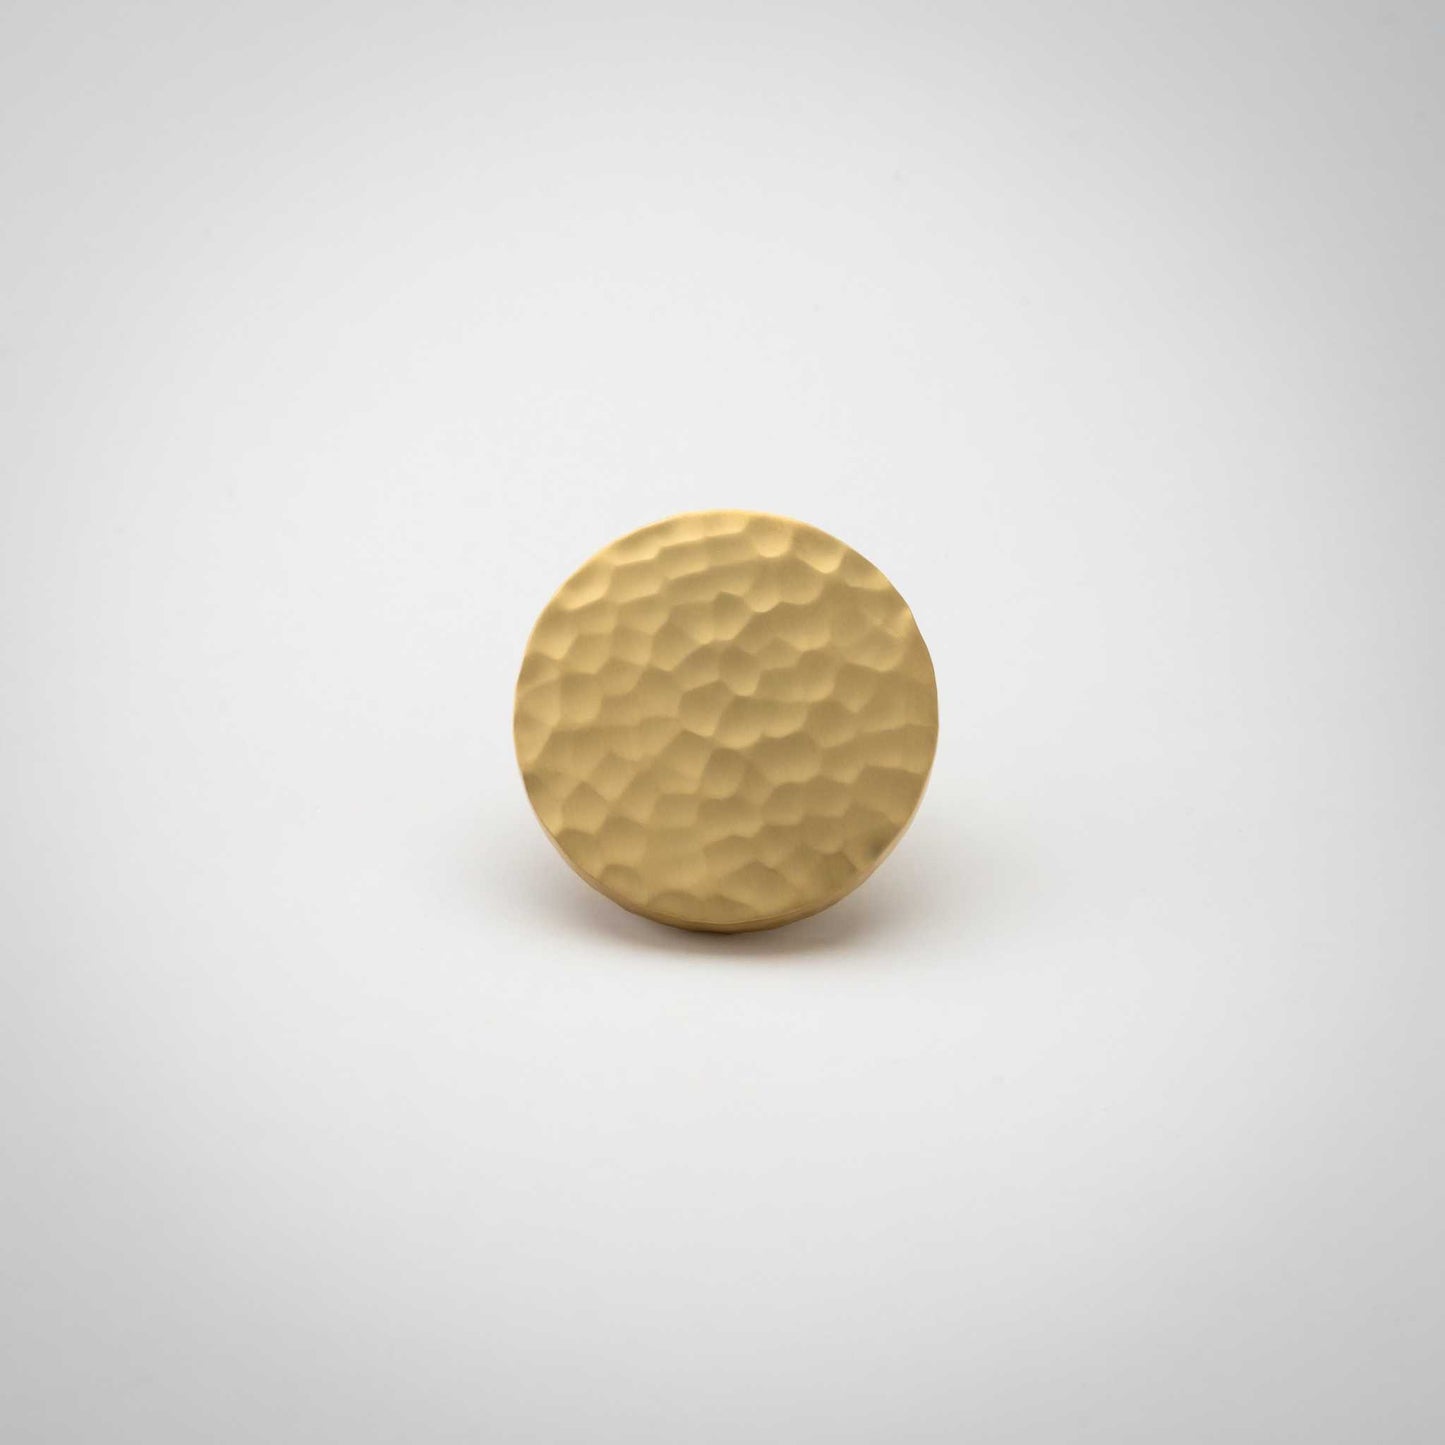 Strike, Hammered Solid Brass Cabinet KnobsOur Strike knob is hand-hammered for a stylish twist on the traditional cabinet knob. Provides a subtle sparkle to your transitional cabinet doors and drawers.KnobStrike, Solid Brass Hammered Cabinet Knobs